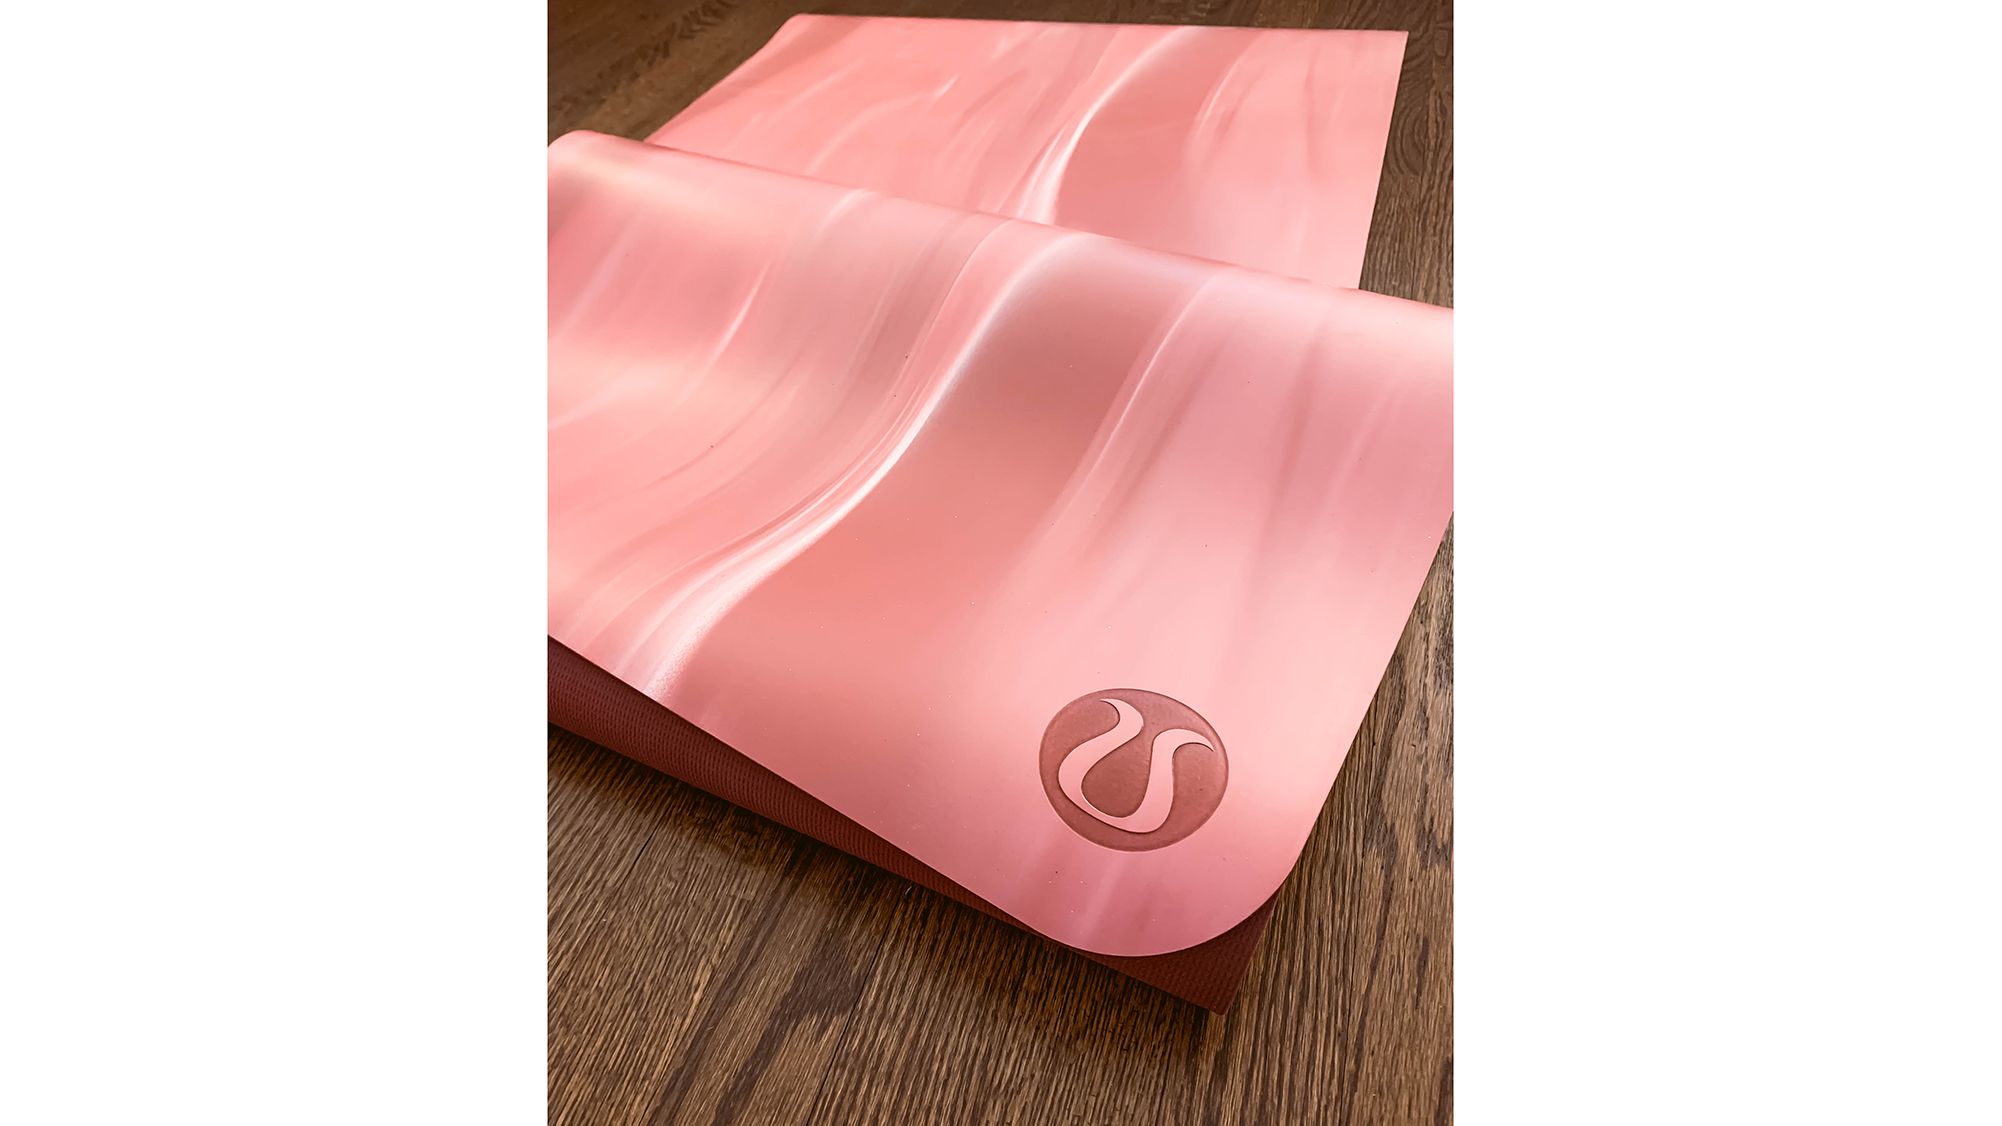 Premium Quality Yoga Products Tested by Professionals – bubbaactive